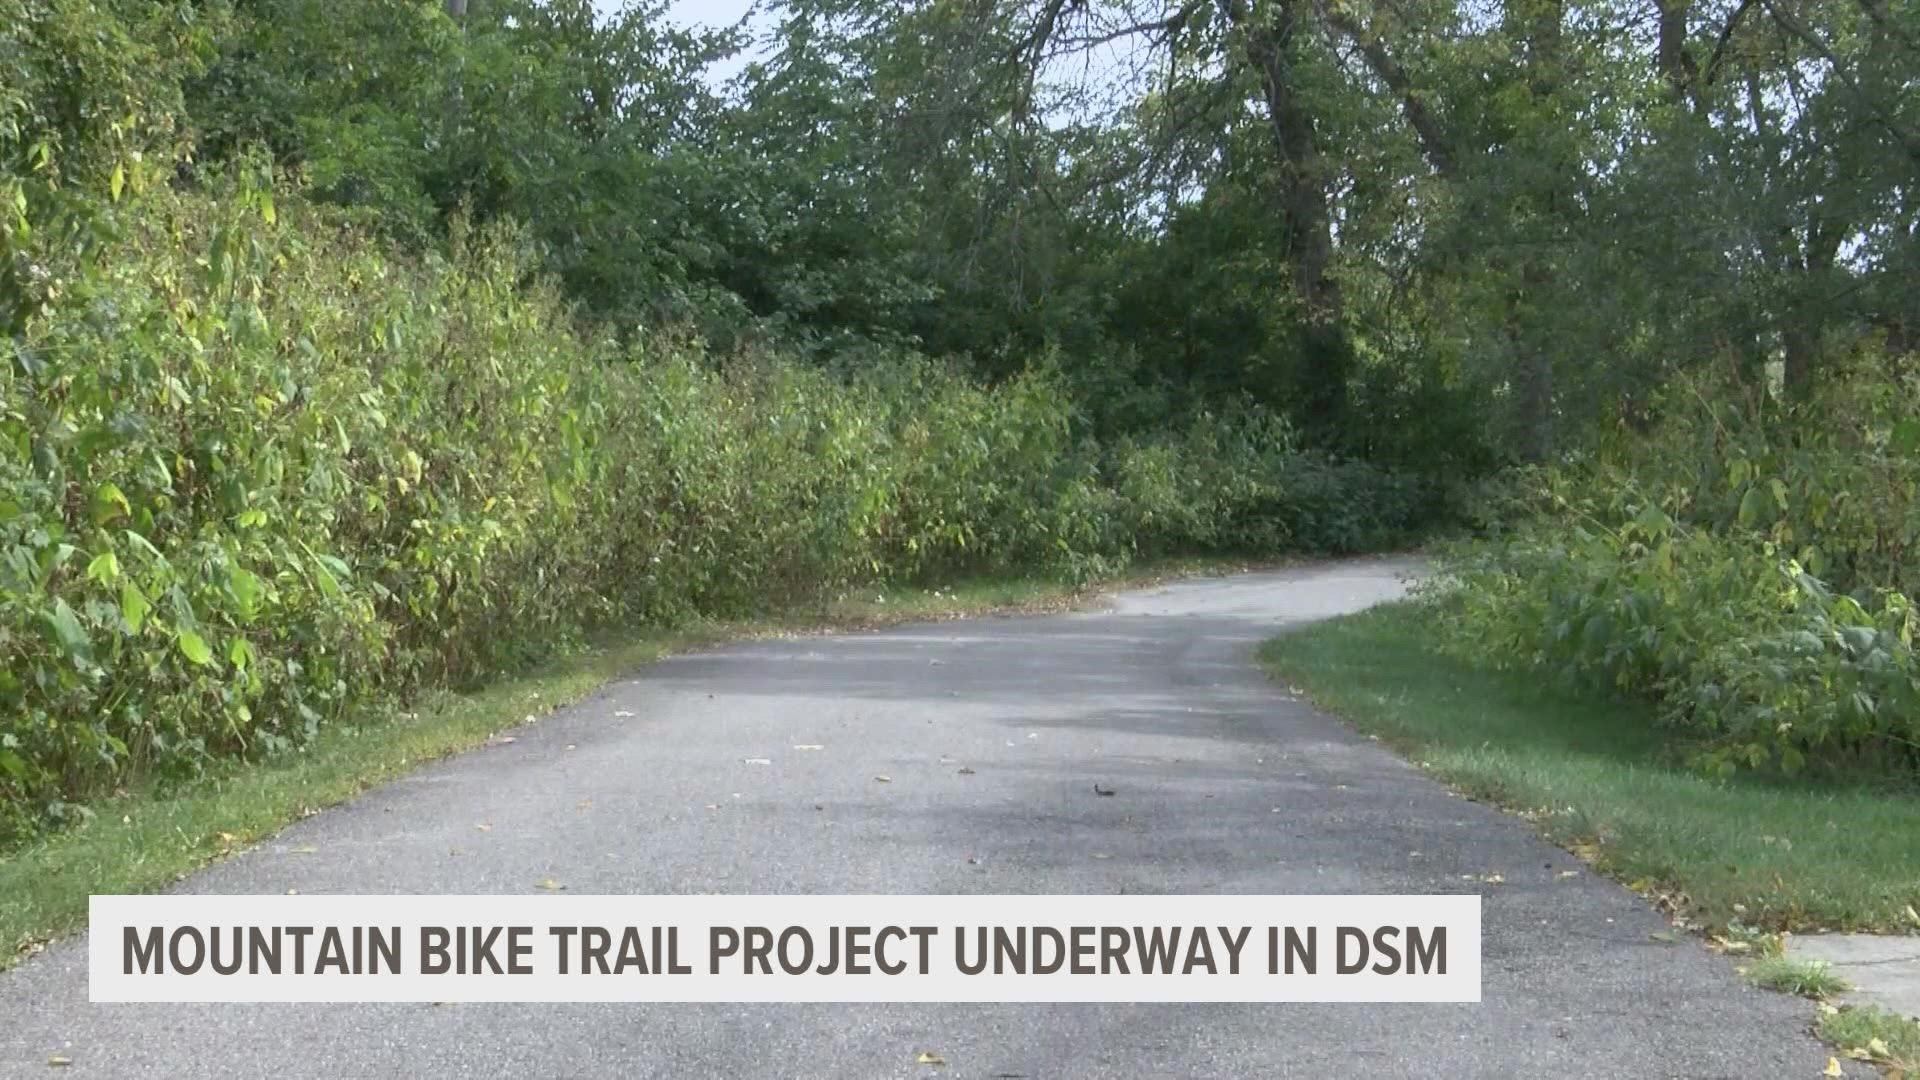 A 50-acre plot of undeveloped land east of Des Moines is set to be converted into a dirt trail complex.